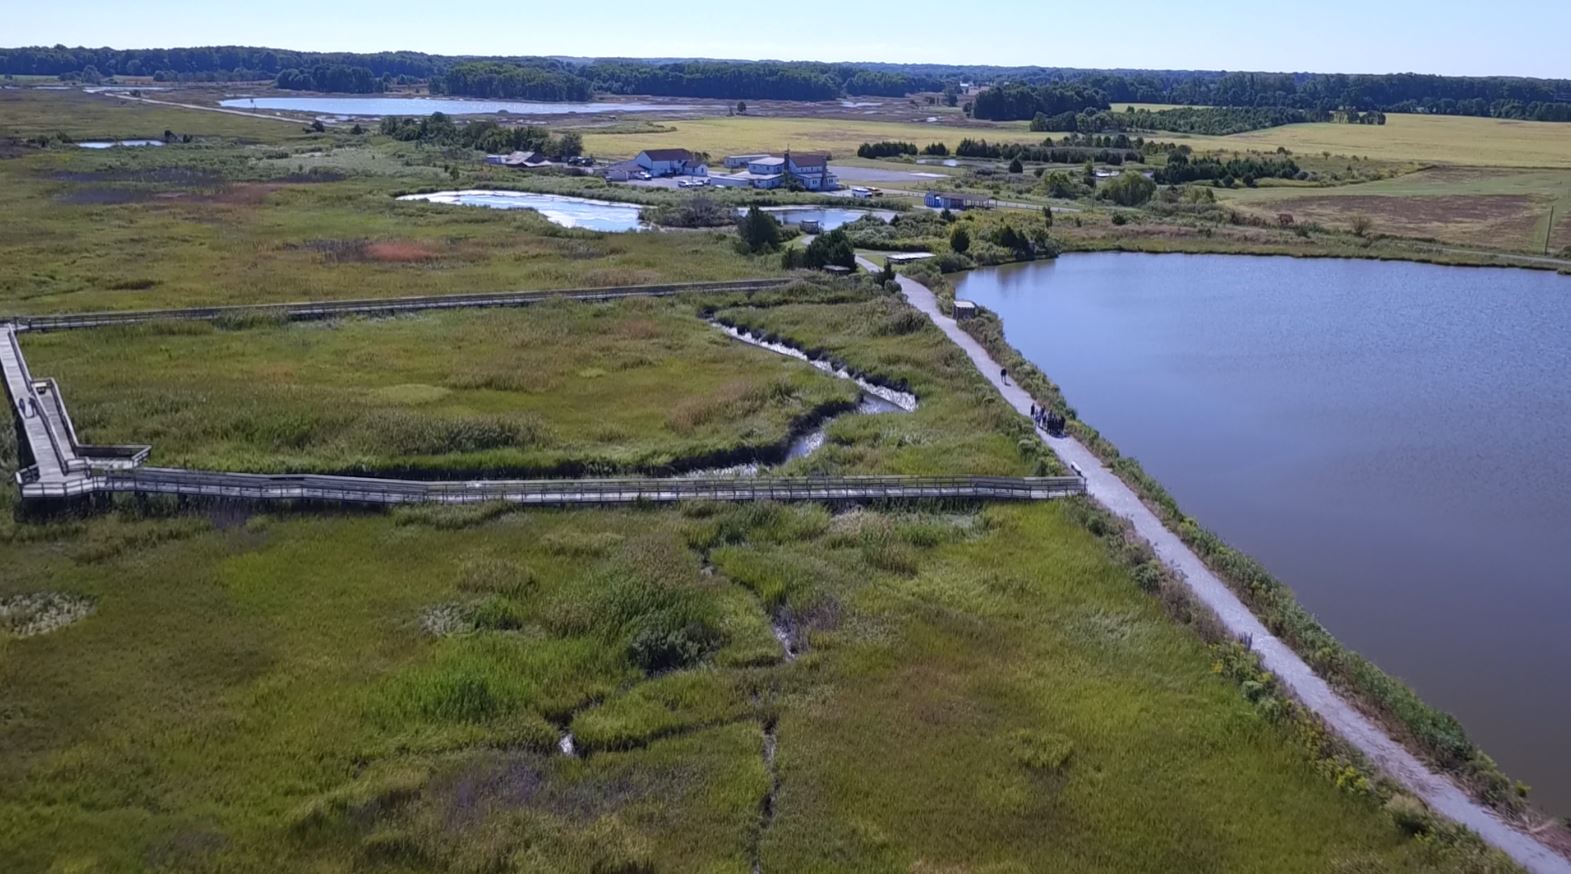 A boardwalk section from a waterside trail out into a coastal marsh and back, seen from the air.